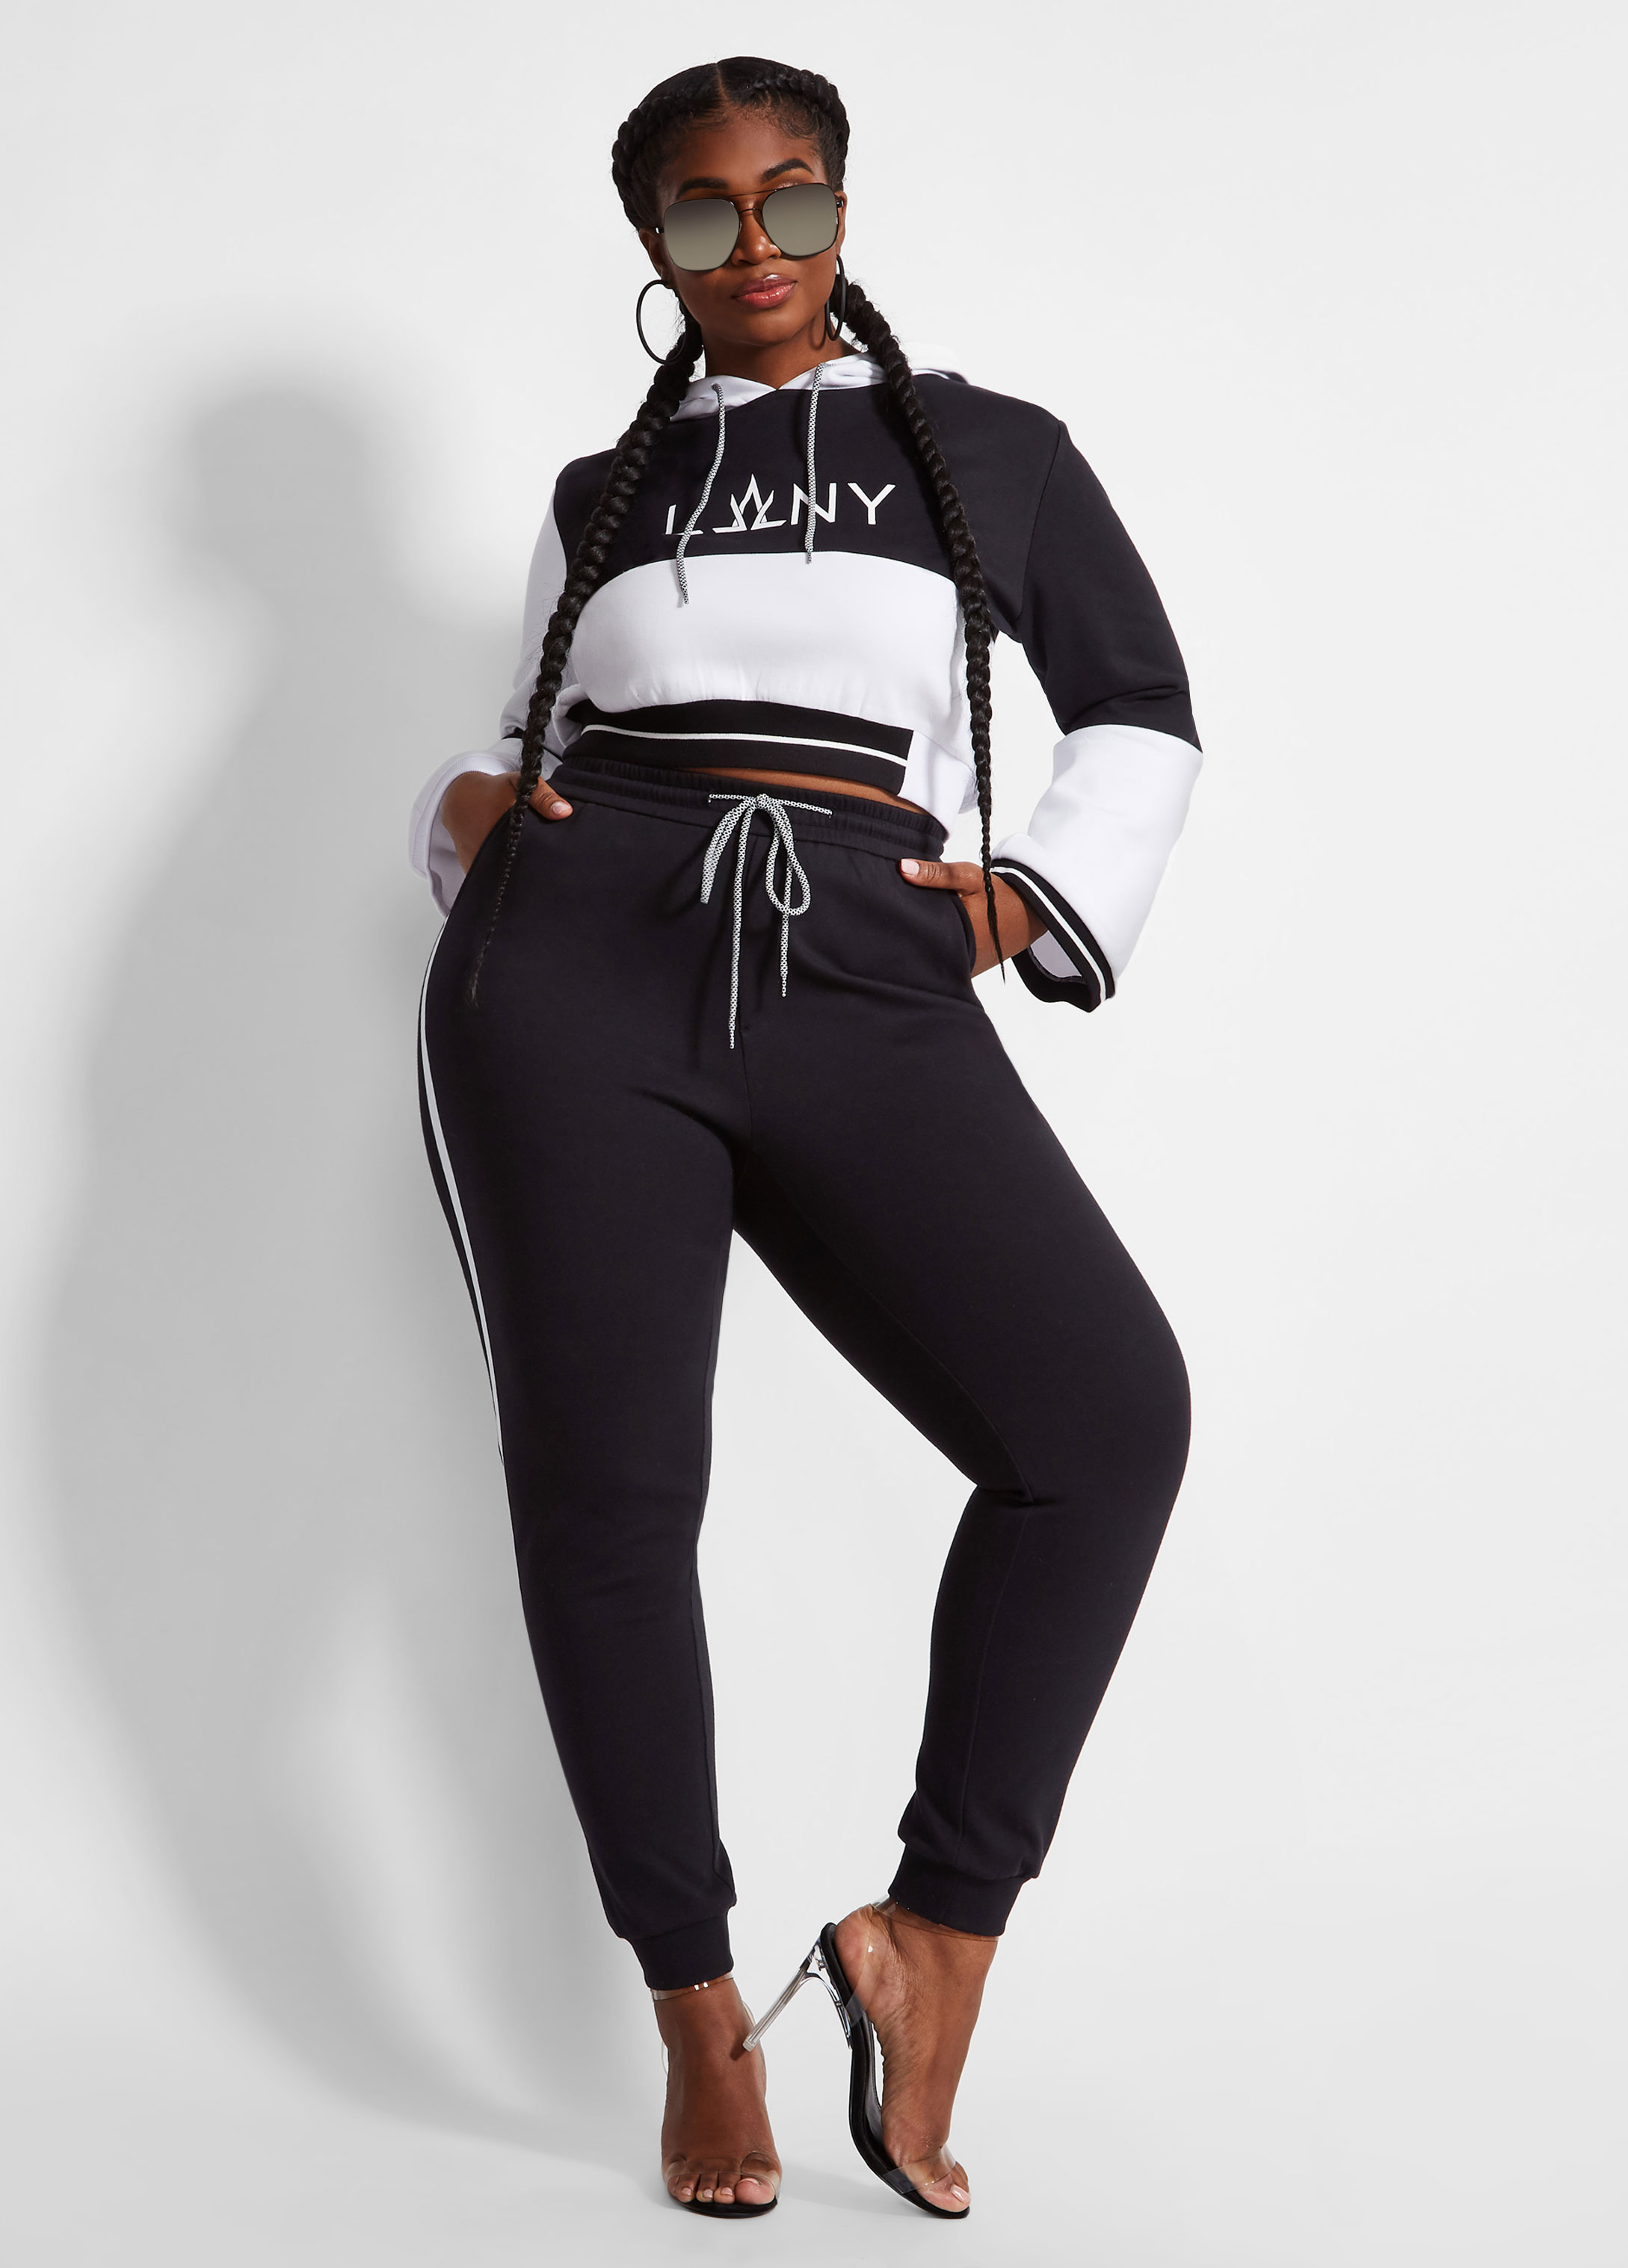 LA LA ANTHONY IS LAUNCHING A PLUS-SIZE COLLECTION WITH ASHLEY